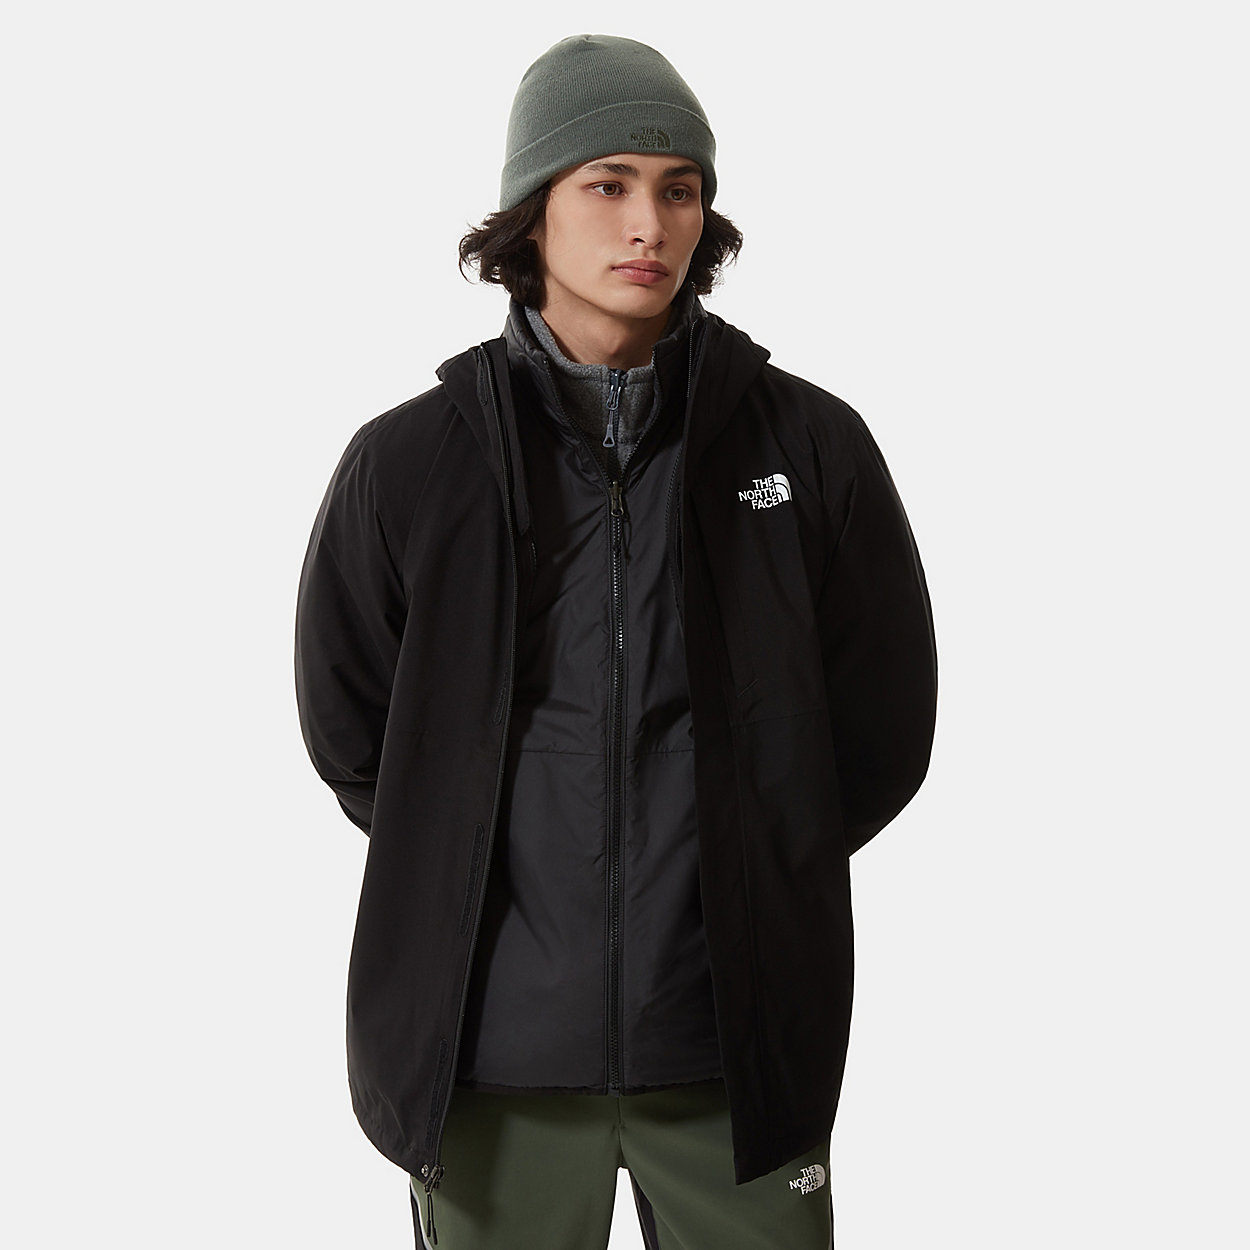 Unlock Wilderness' choice in the Mountain Warehouse Vs North Face comparison, the Carto Triclimate Jacket by The North Face